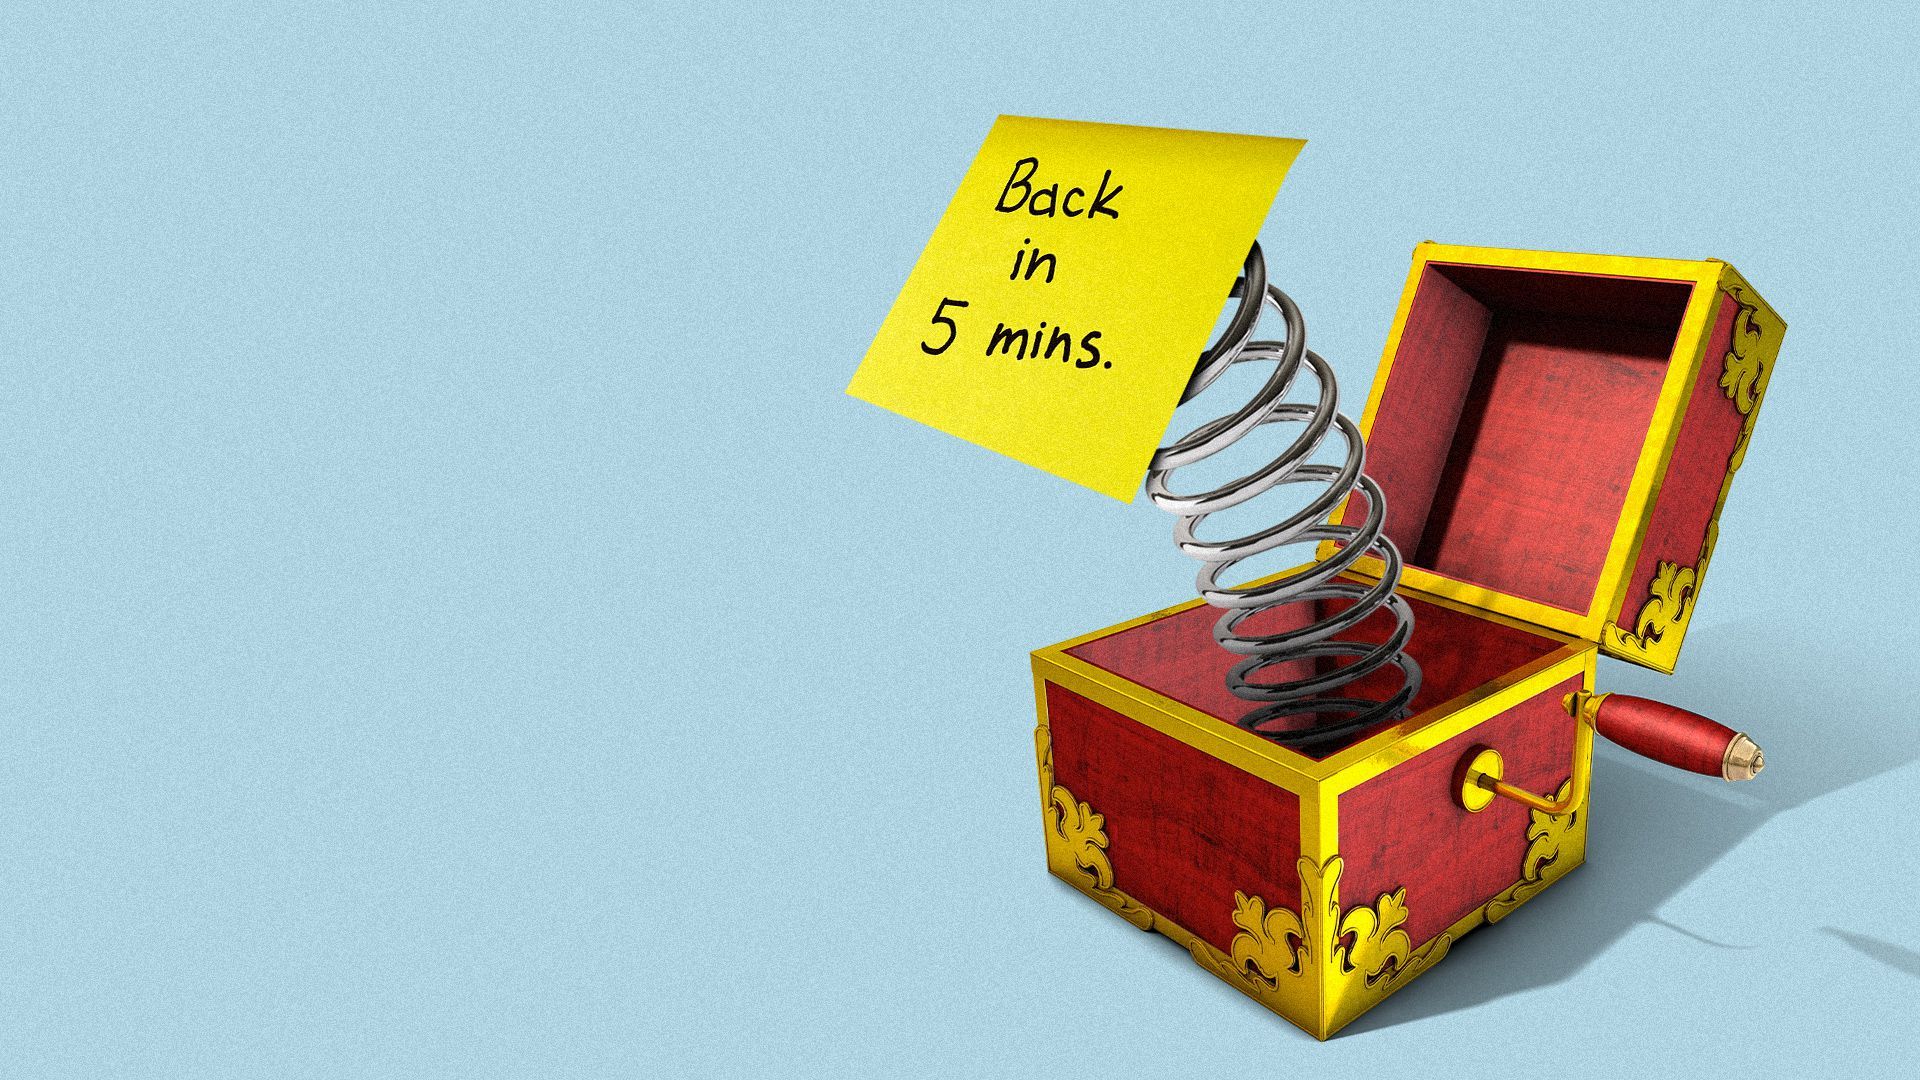 Illustration of a jack-in-the-box with a "Back in 5 minutes" note on the spring.  